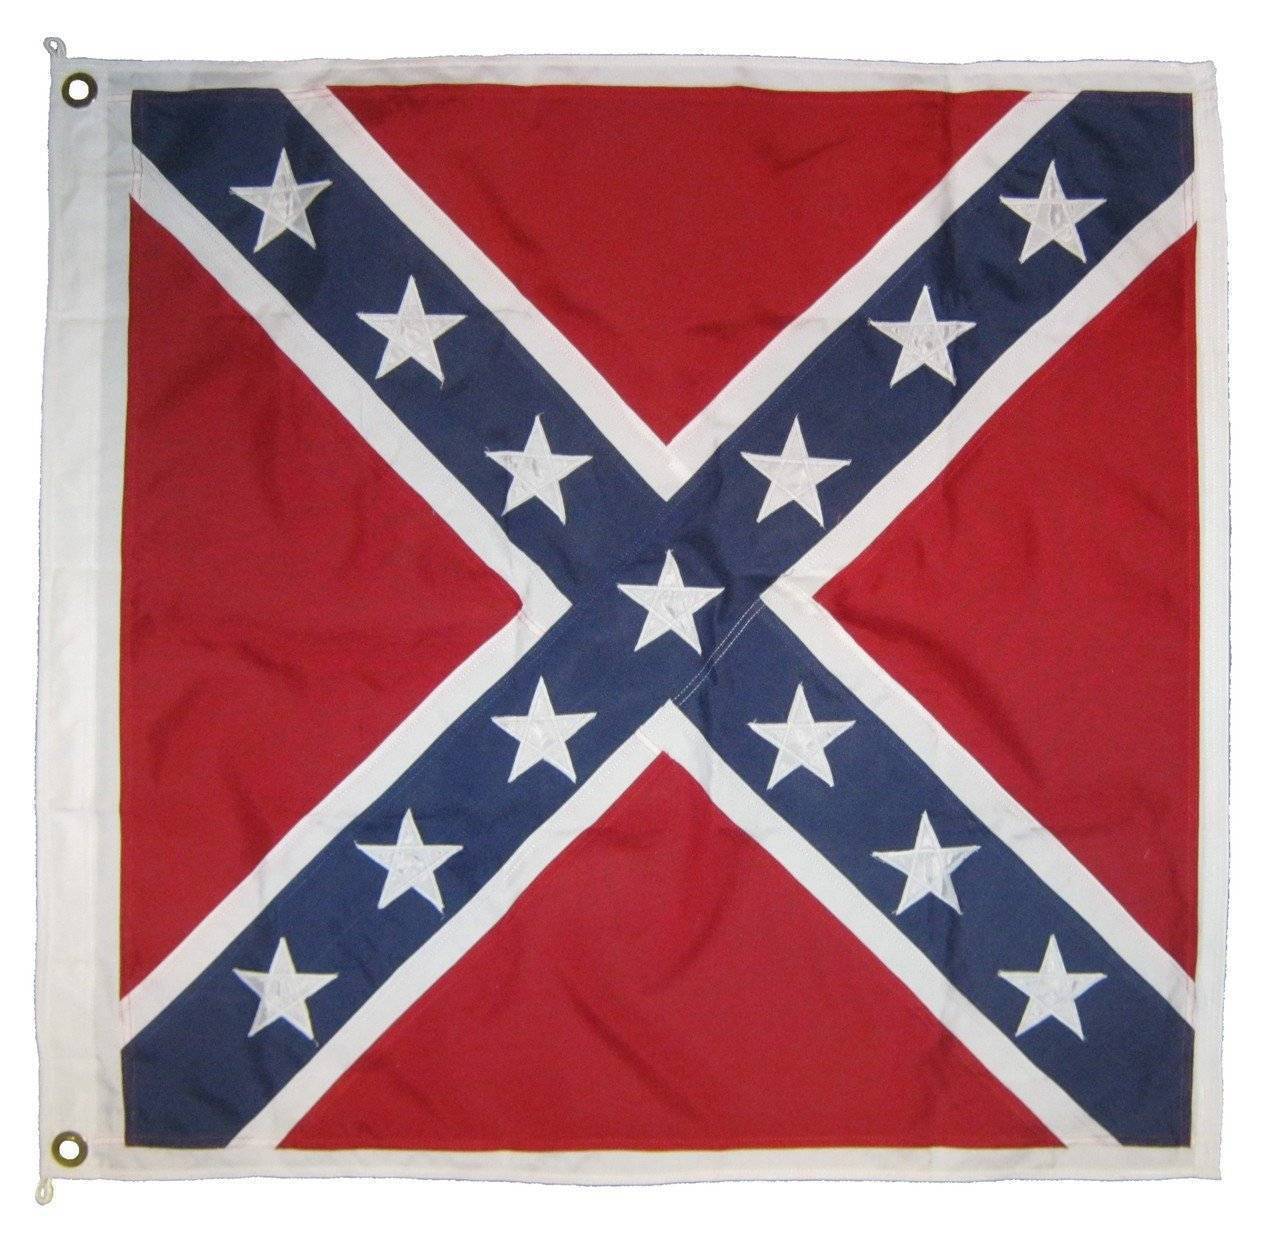 RU Flag 52x52 Inch Rebel, Confederate Battle Flag Calvary Cotton with Grommets